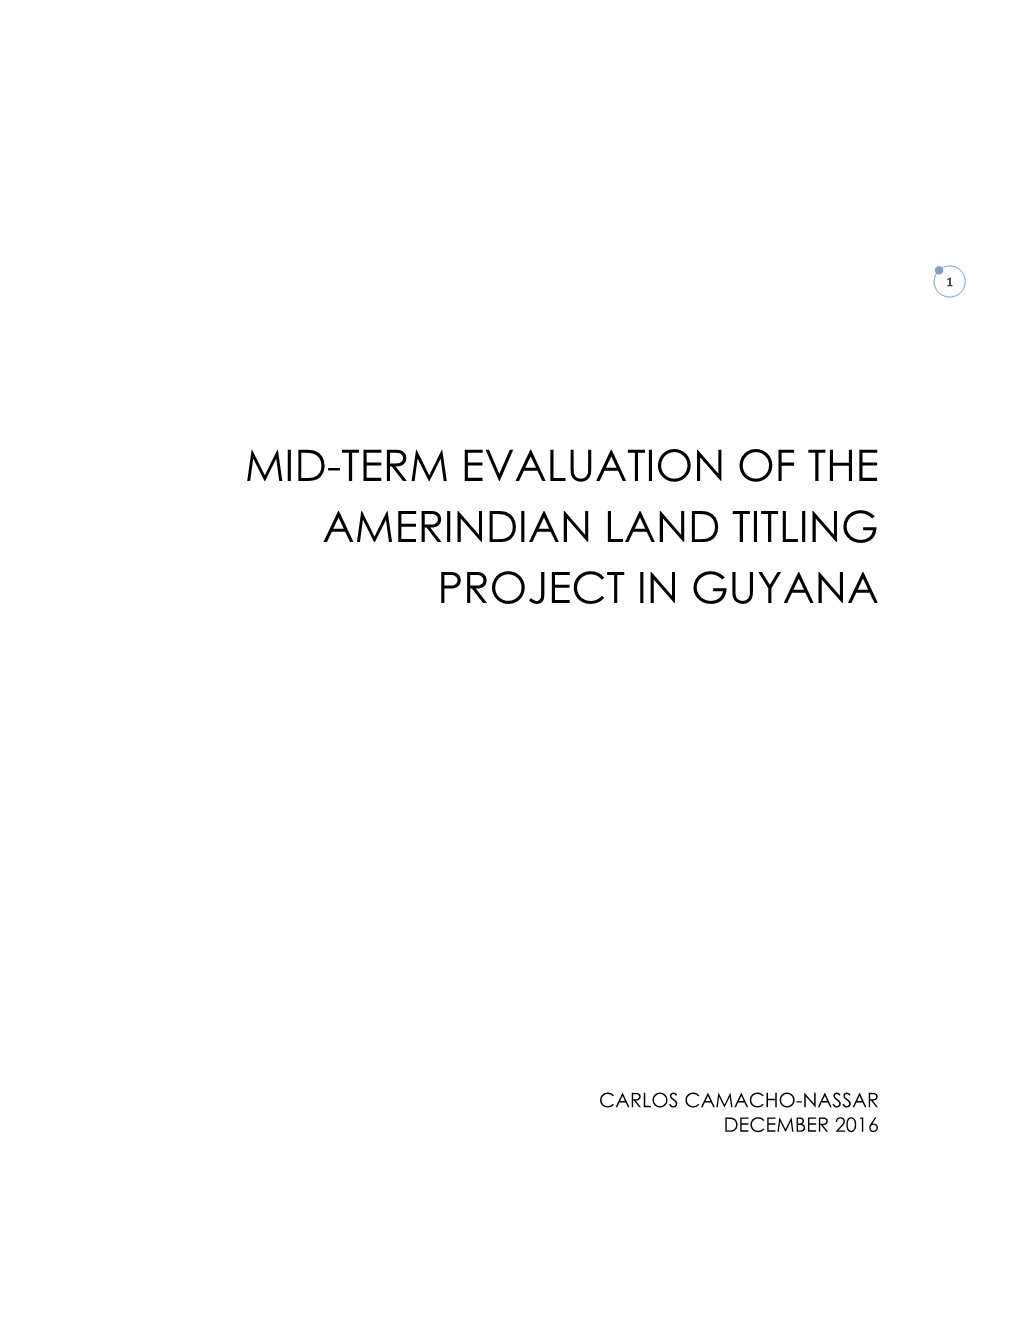 Mid-Term Evaluation of the Amerindian Land Titling Project in Guyana